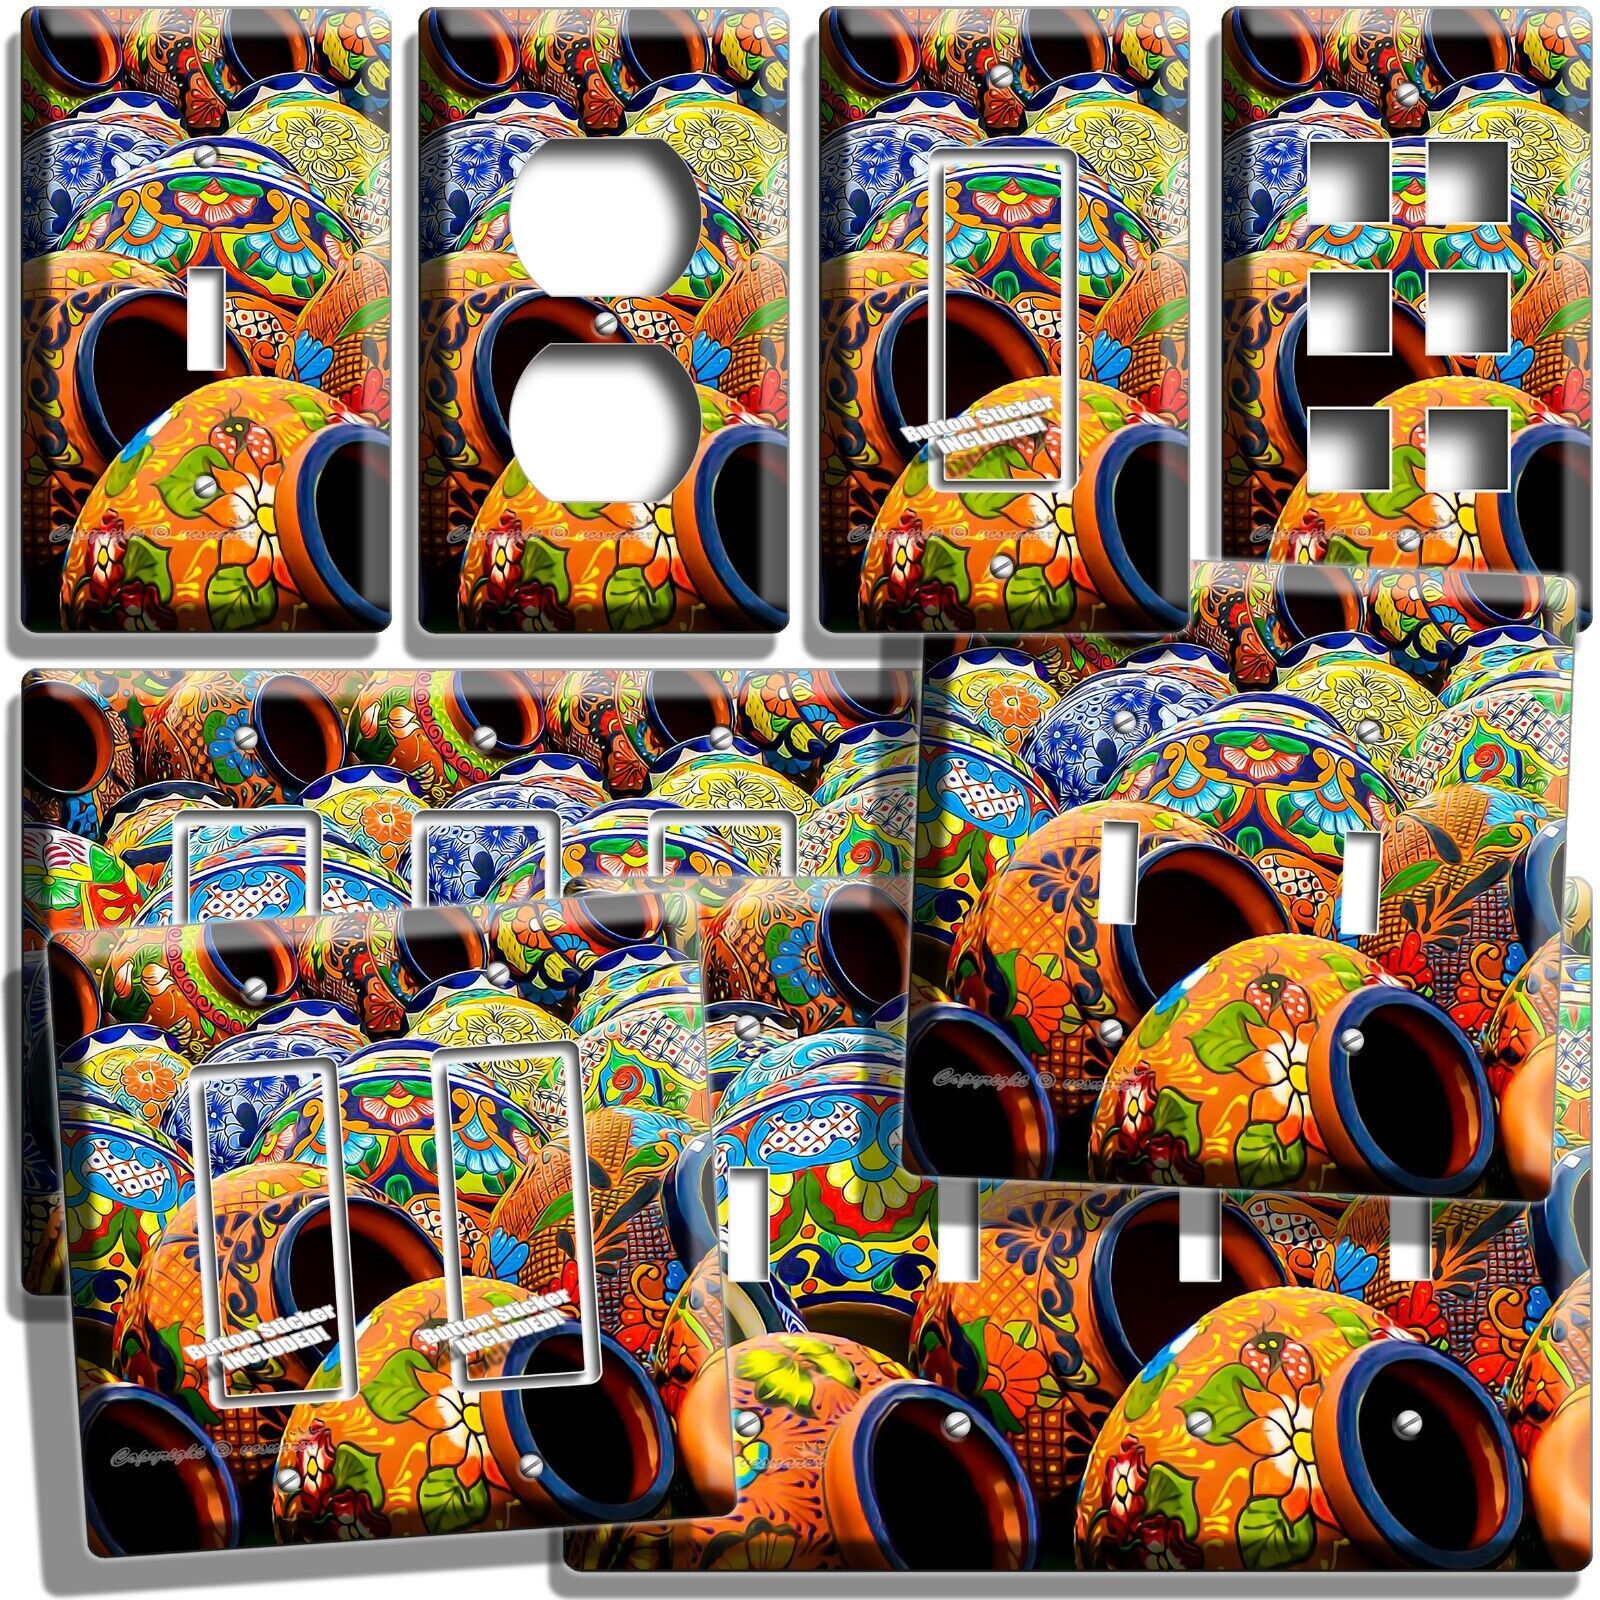 MEXICAN TALAVERA POTS VASES LIGHTSWITCH OUTLET WALL PLATE SOUTHWESTERN ART DECOR - $17.99 - $28.99